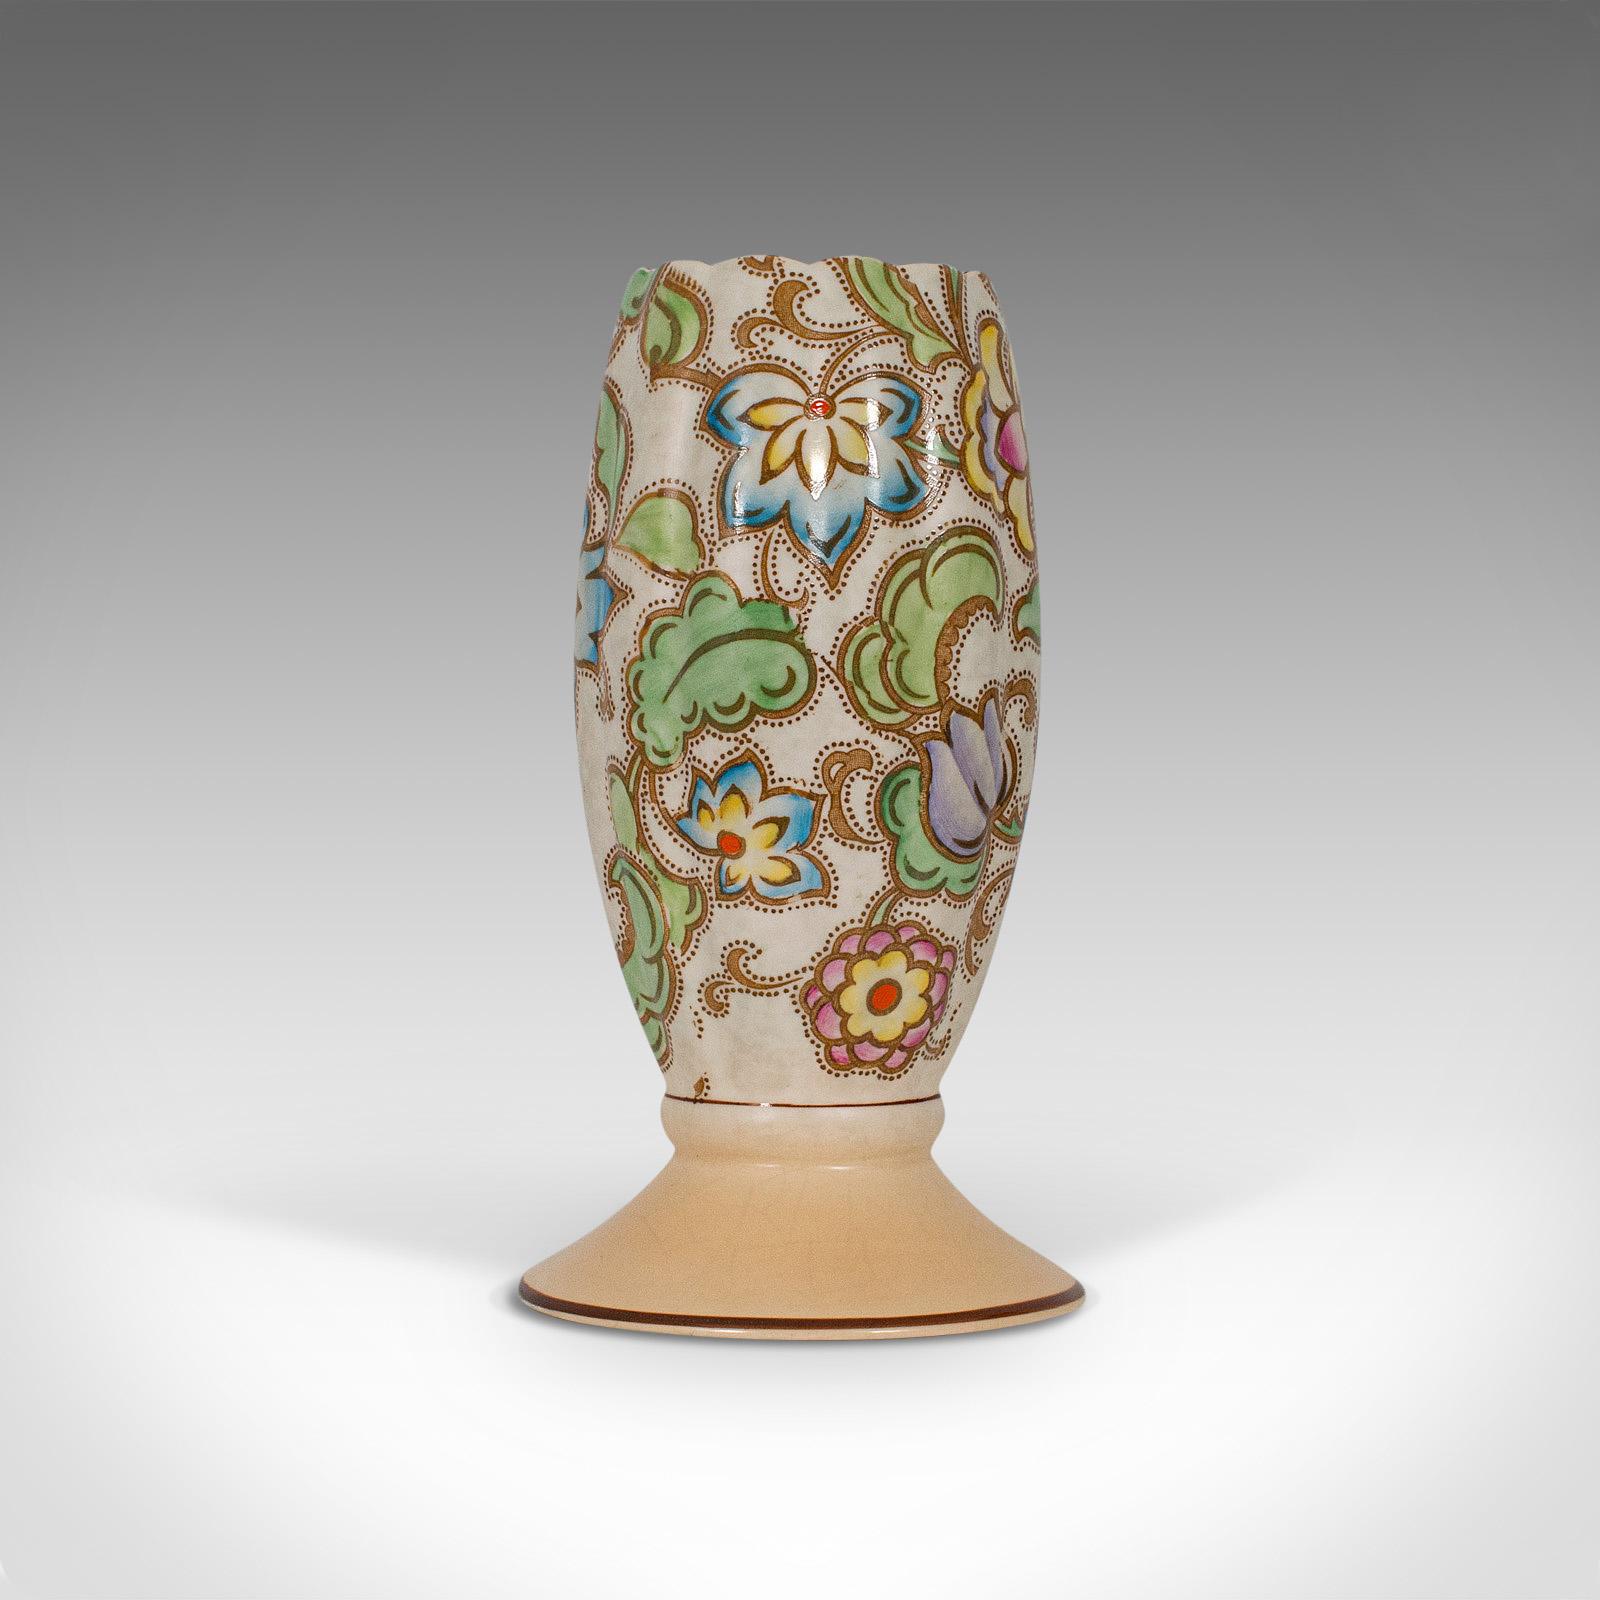 This is a small vintage flower vase. An English, ceramic goblet urn in Art Deco taste, dating to the mid-20th century, circa 1940.

Charming, unusual goblet form
Displays a desirable aged patina
Ceramic in good order with bright glaze
Hand